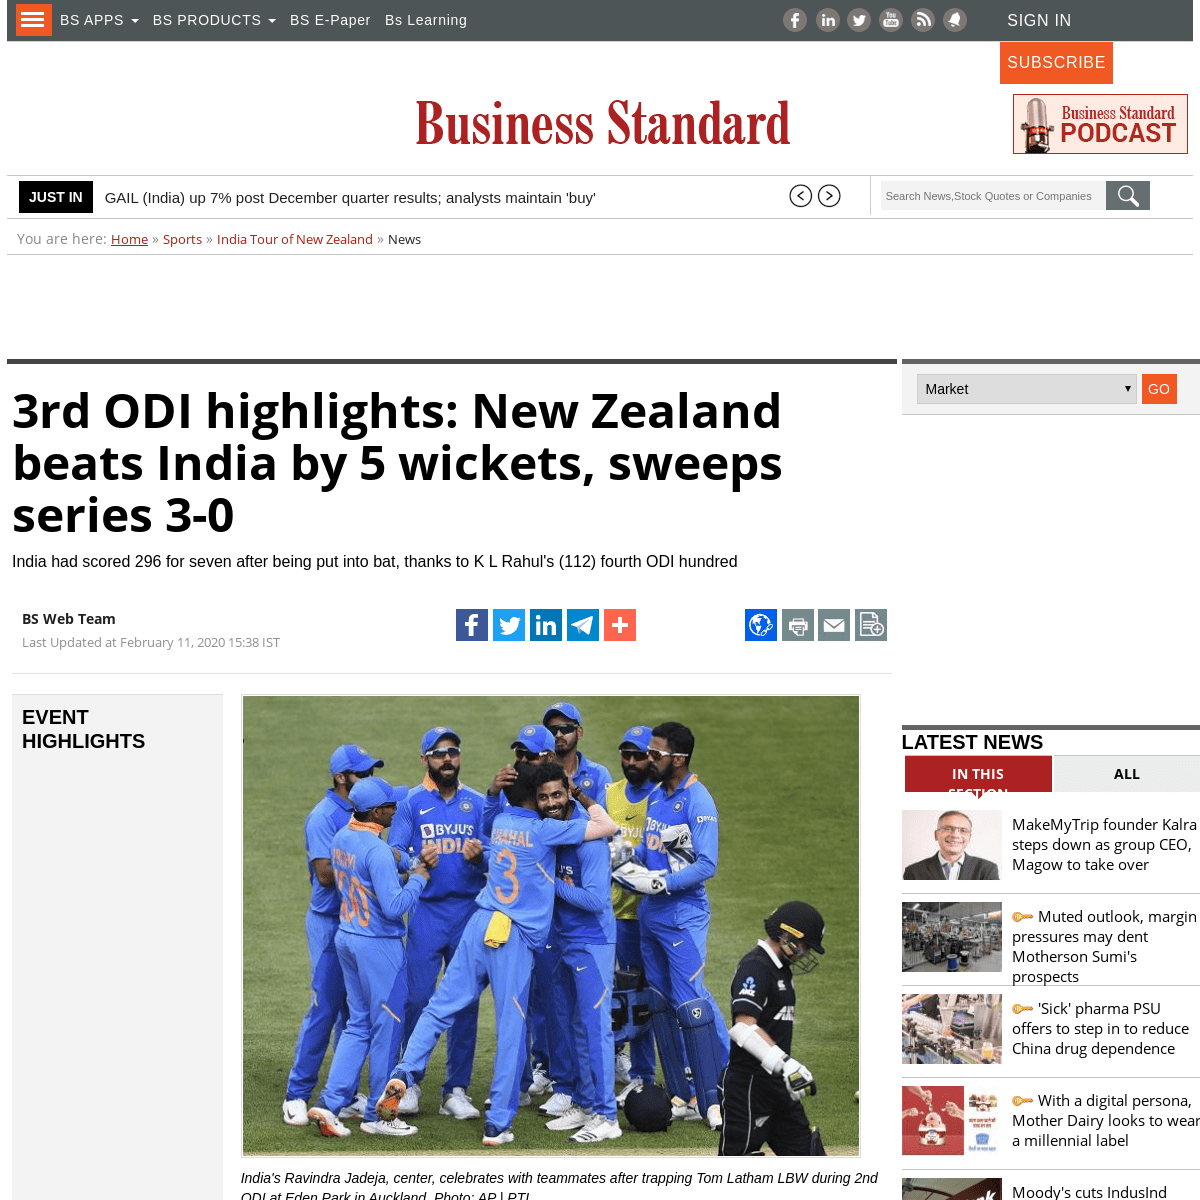 A complete backup of www.business-standard.com/article/sports/india-vs-new-zealand-3rd-odi-live-score-toss-and-match-updates-120